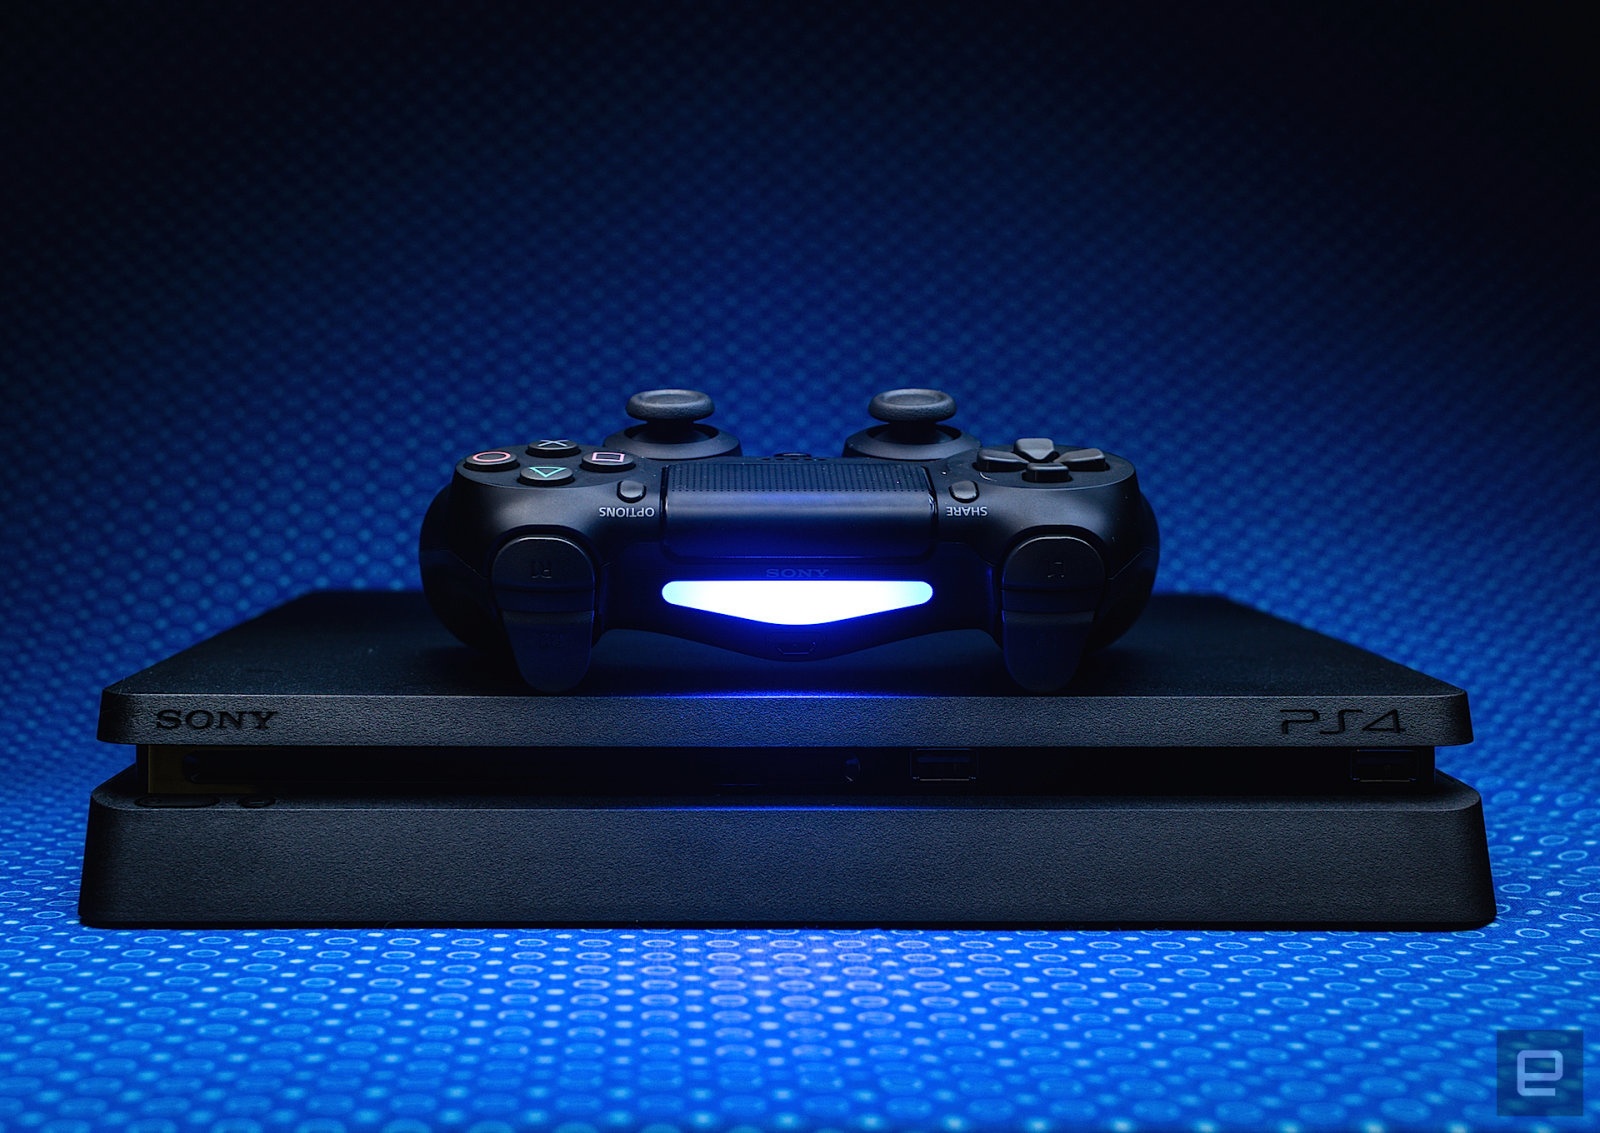 Sony will sell a PlayStation 4 for $200 on Black Friday